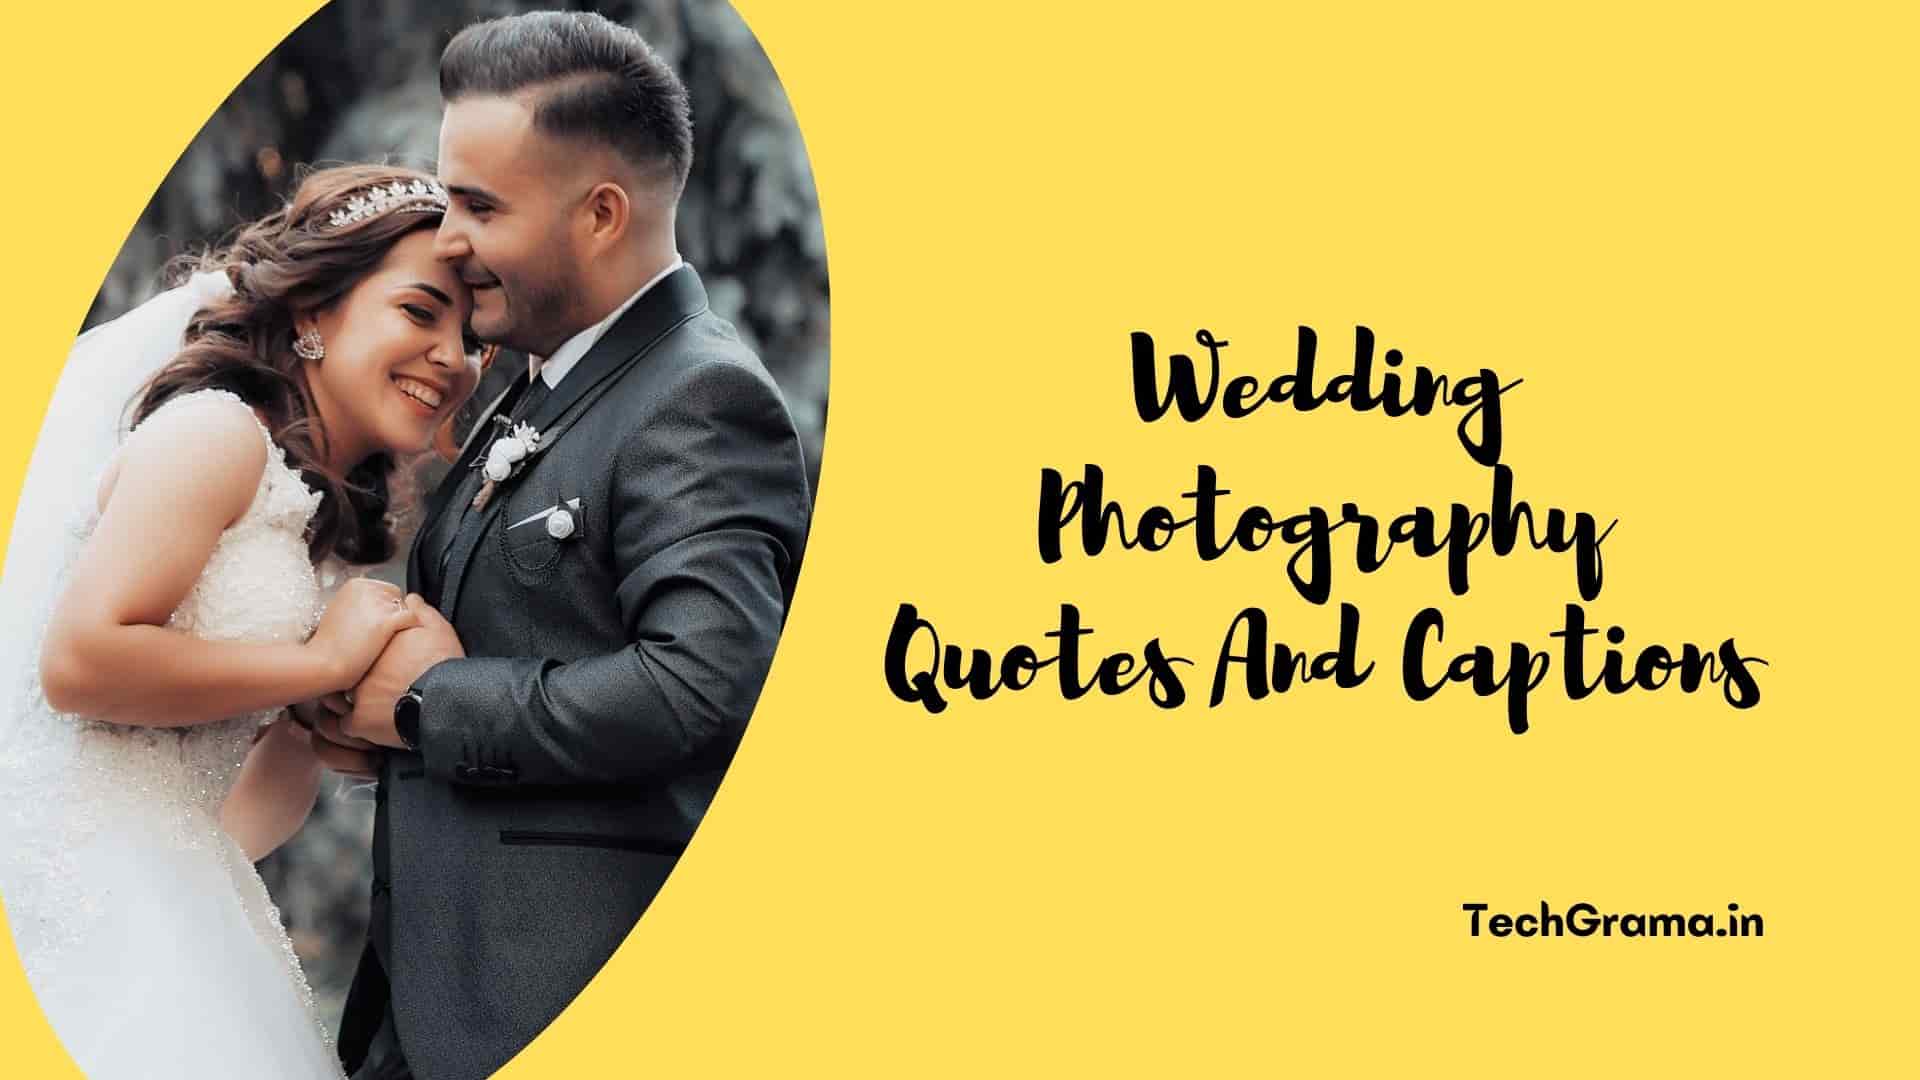 210+】 Best Wedding Photography Quotes And Captions – TechGrama